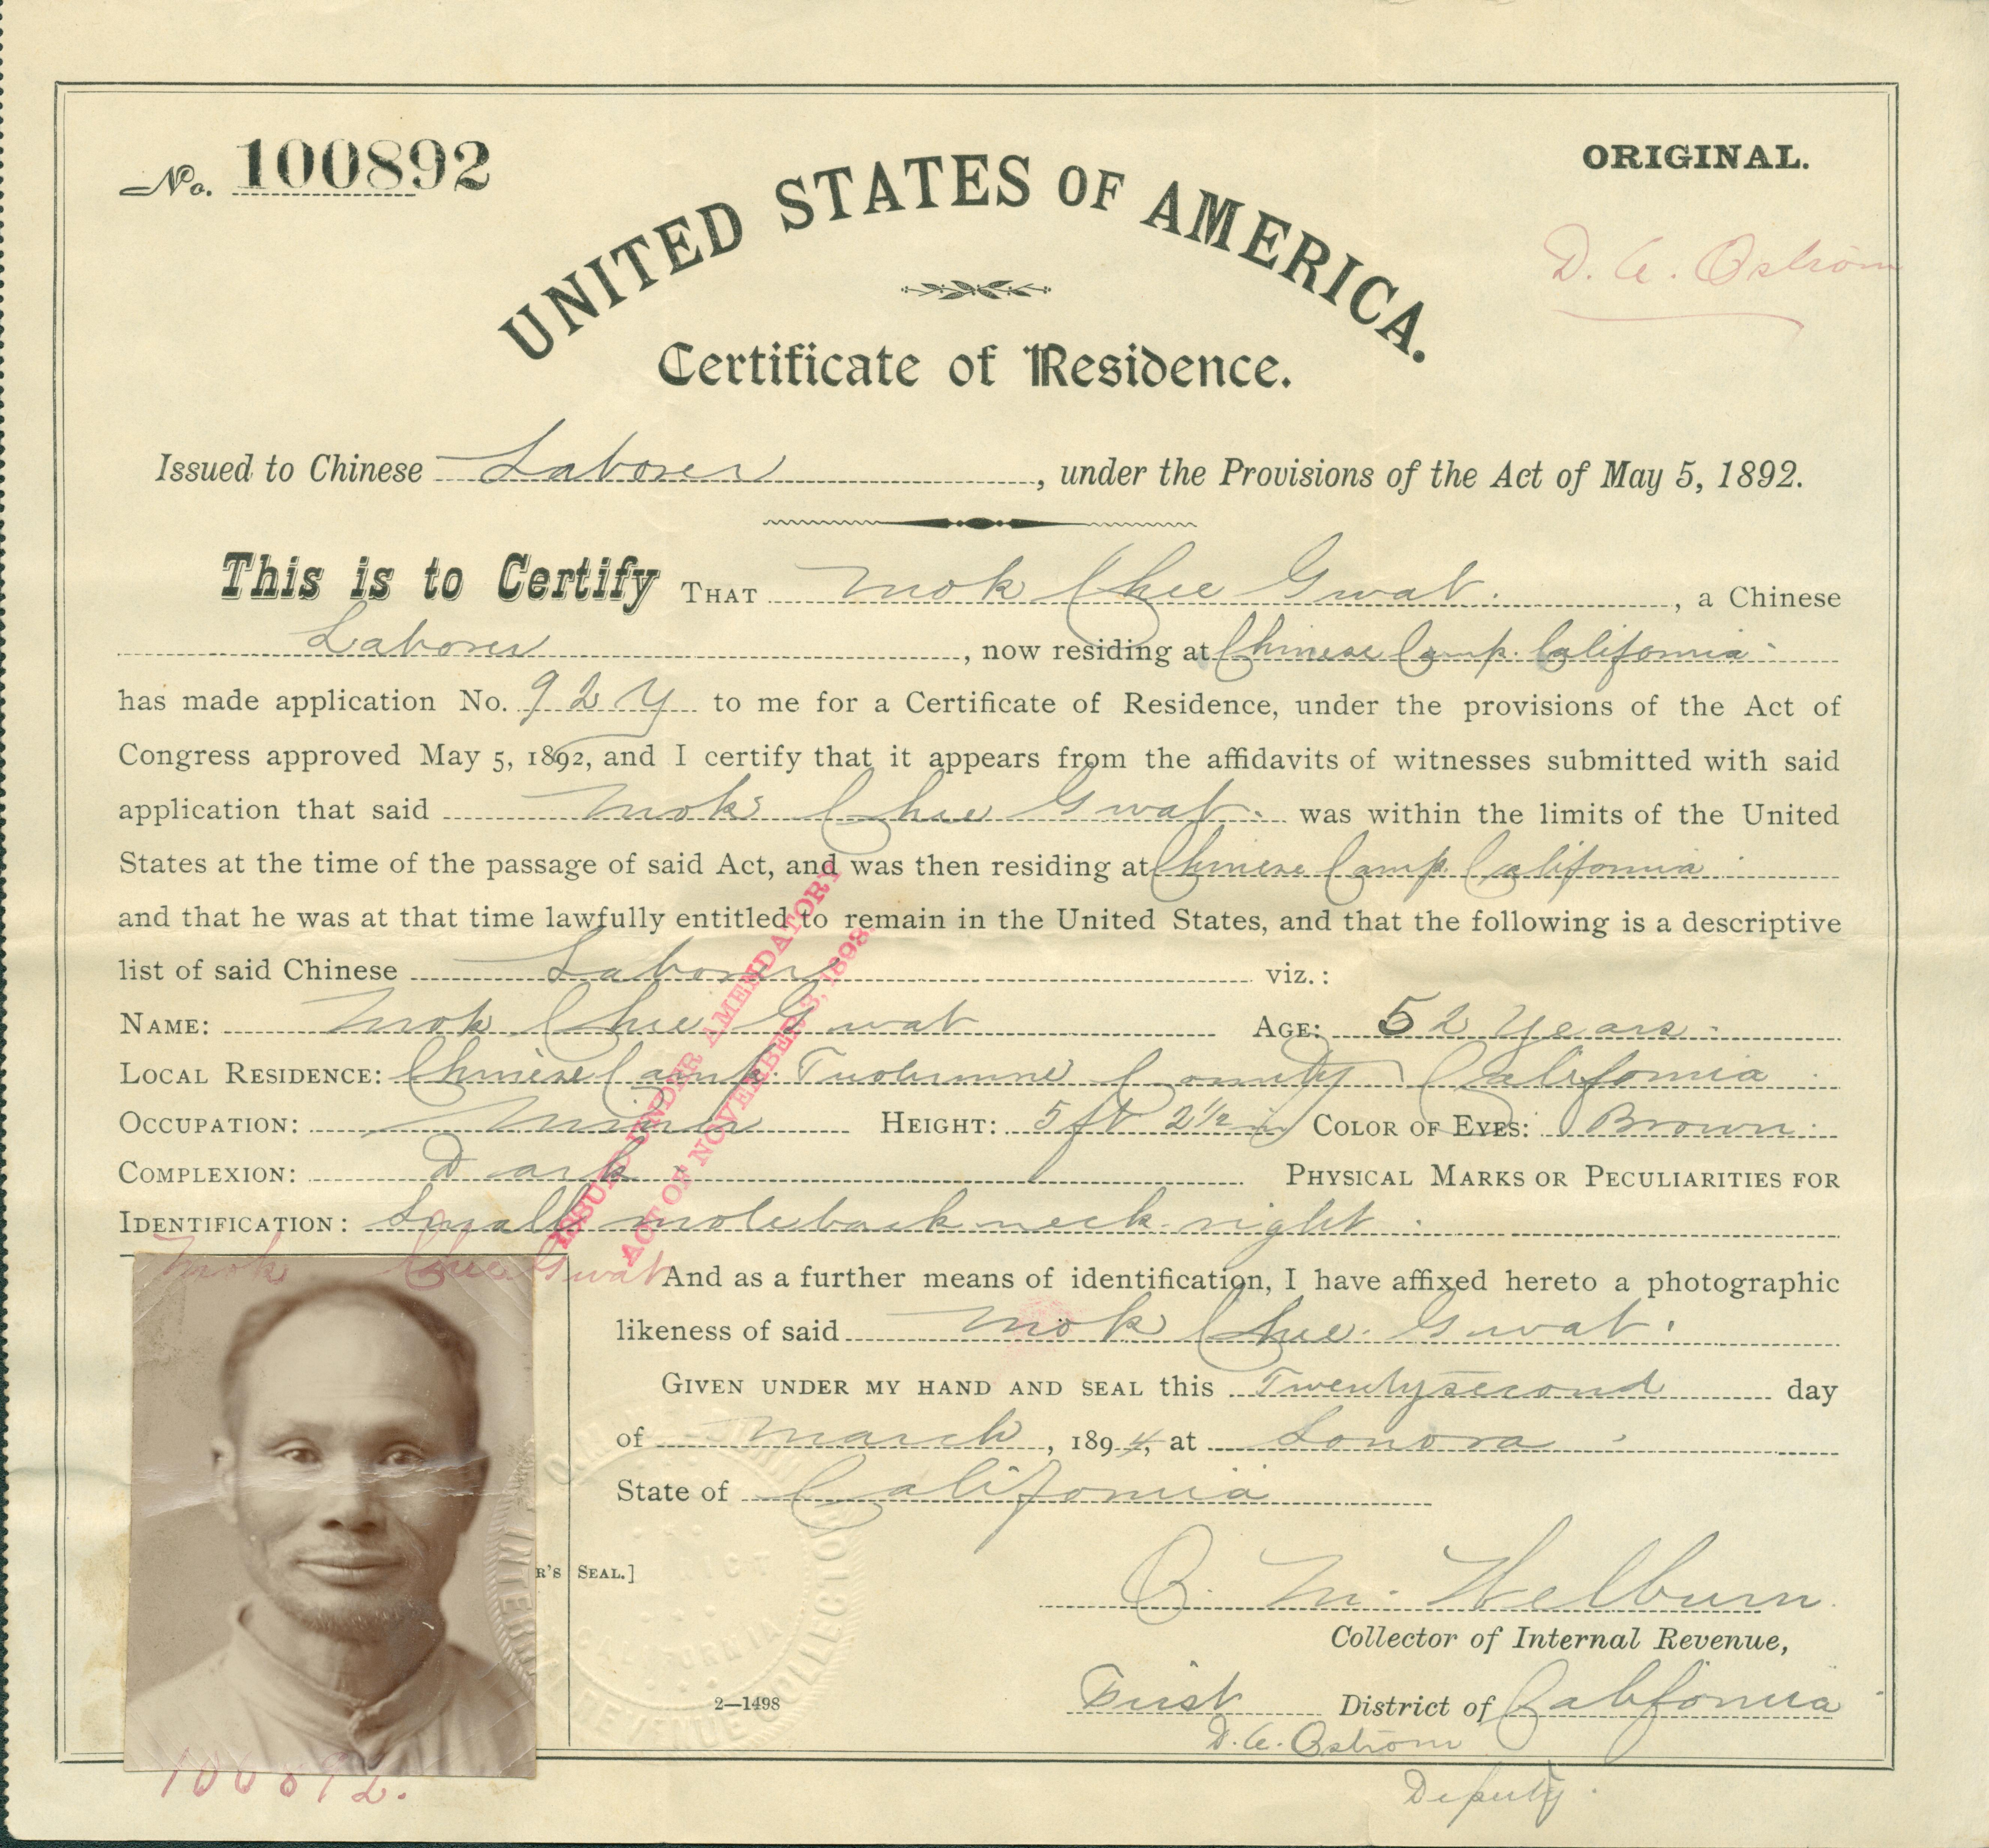 Shows certificate of residence with a portrait in the lower left